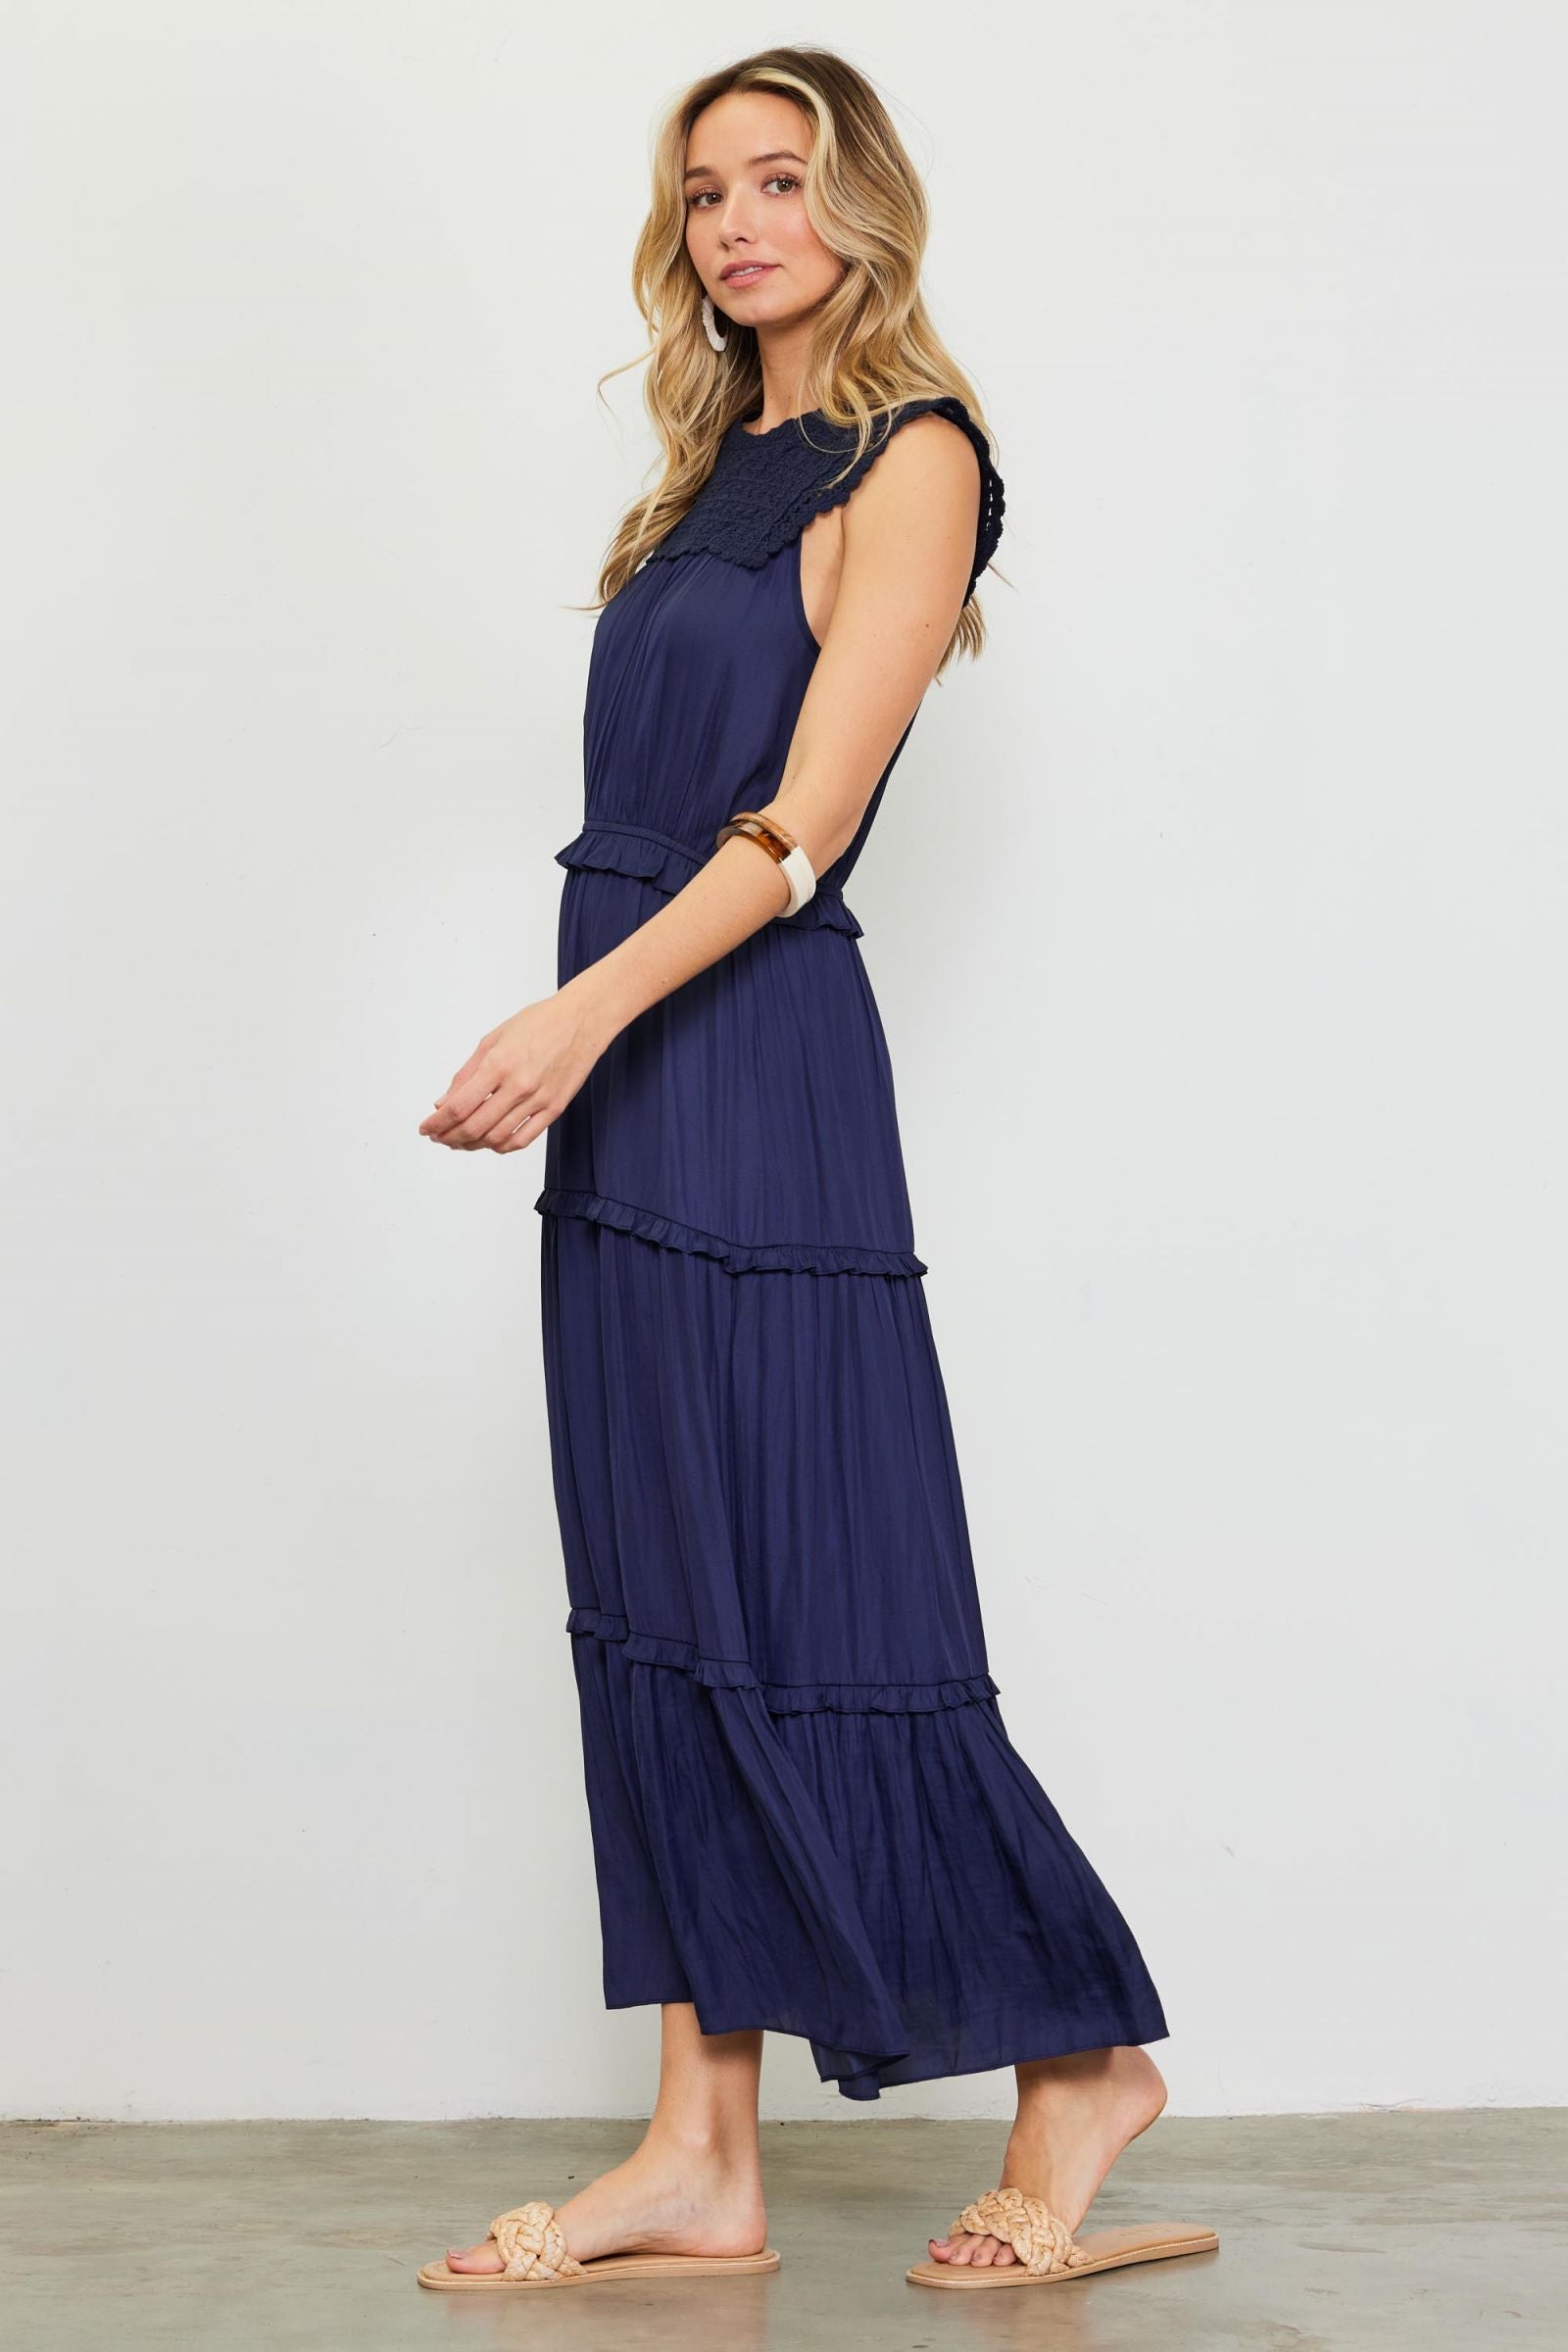 Skies Are Blue Navy Crochet Tiered Maxi Dress